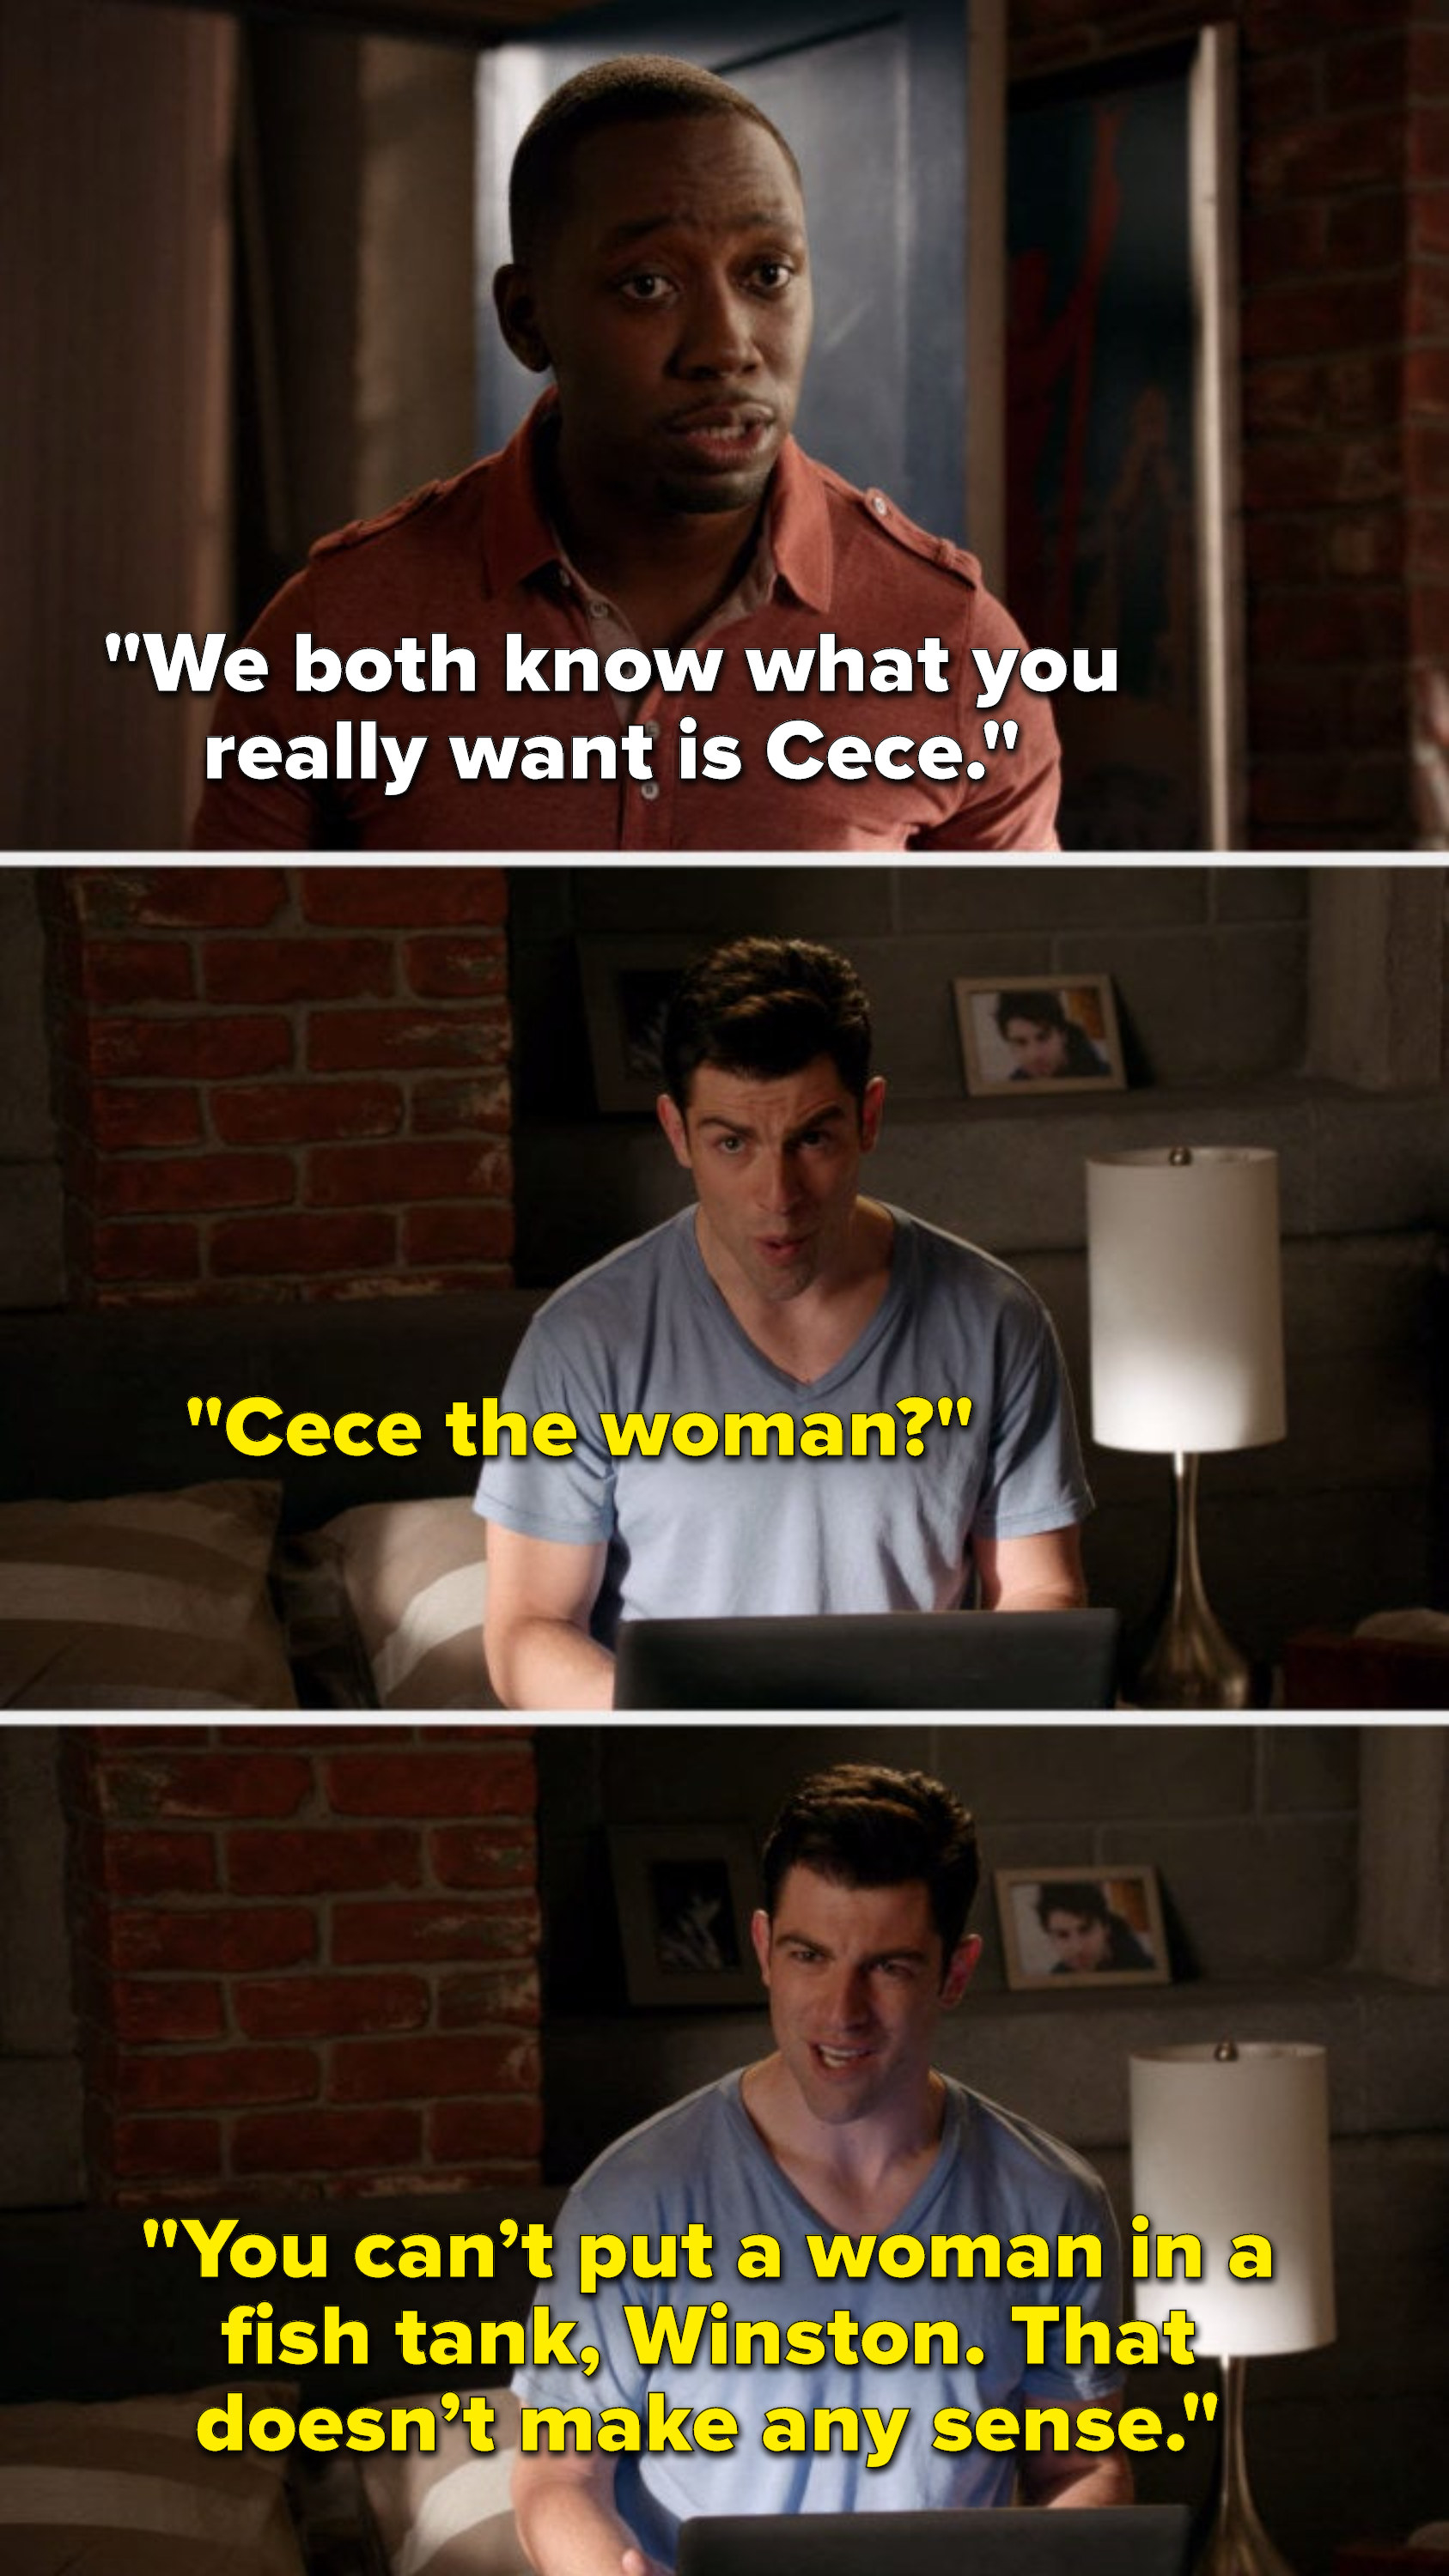 Winston says, We both know what you really want is Cece, and Schmidt says, Cece the woman, you can’t put a woman in a fish tank, Winston, that doesn’t make any sense